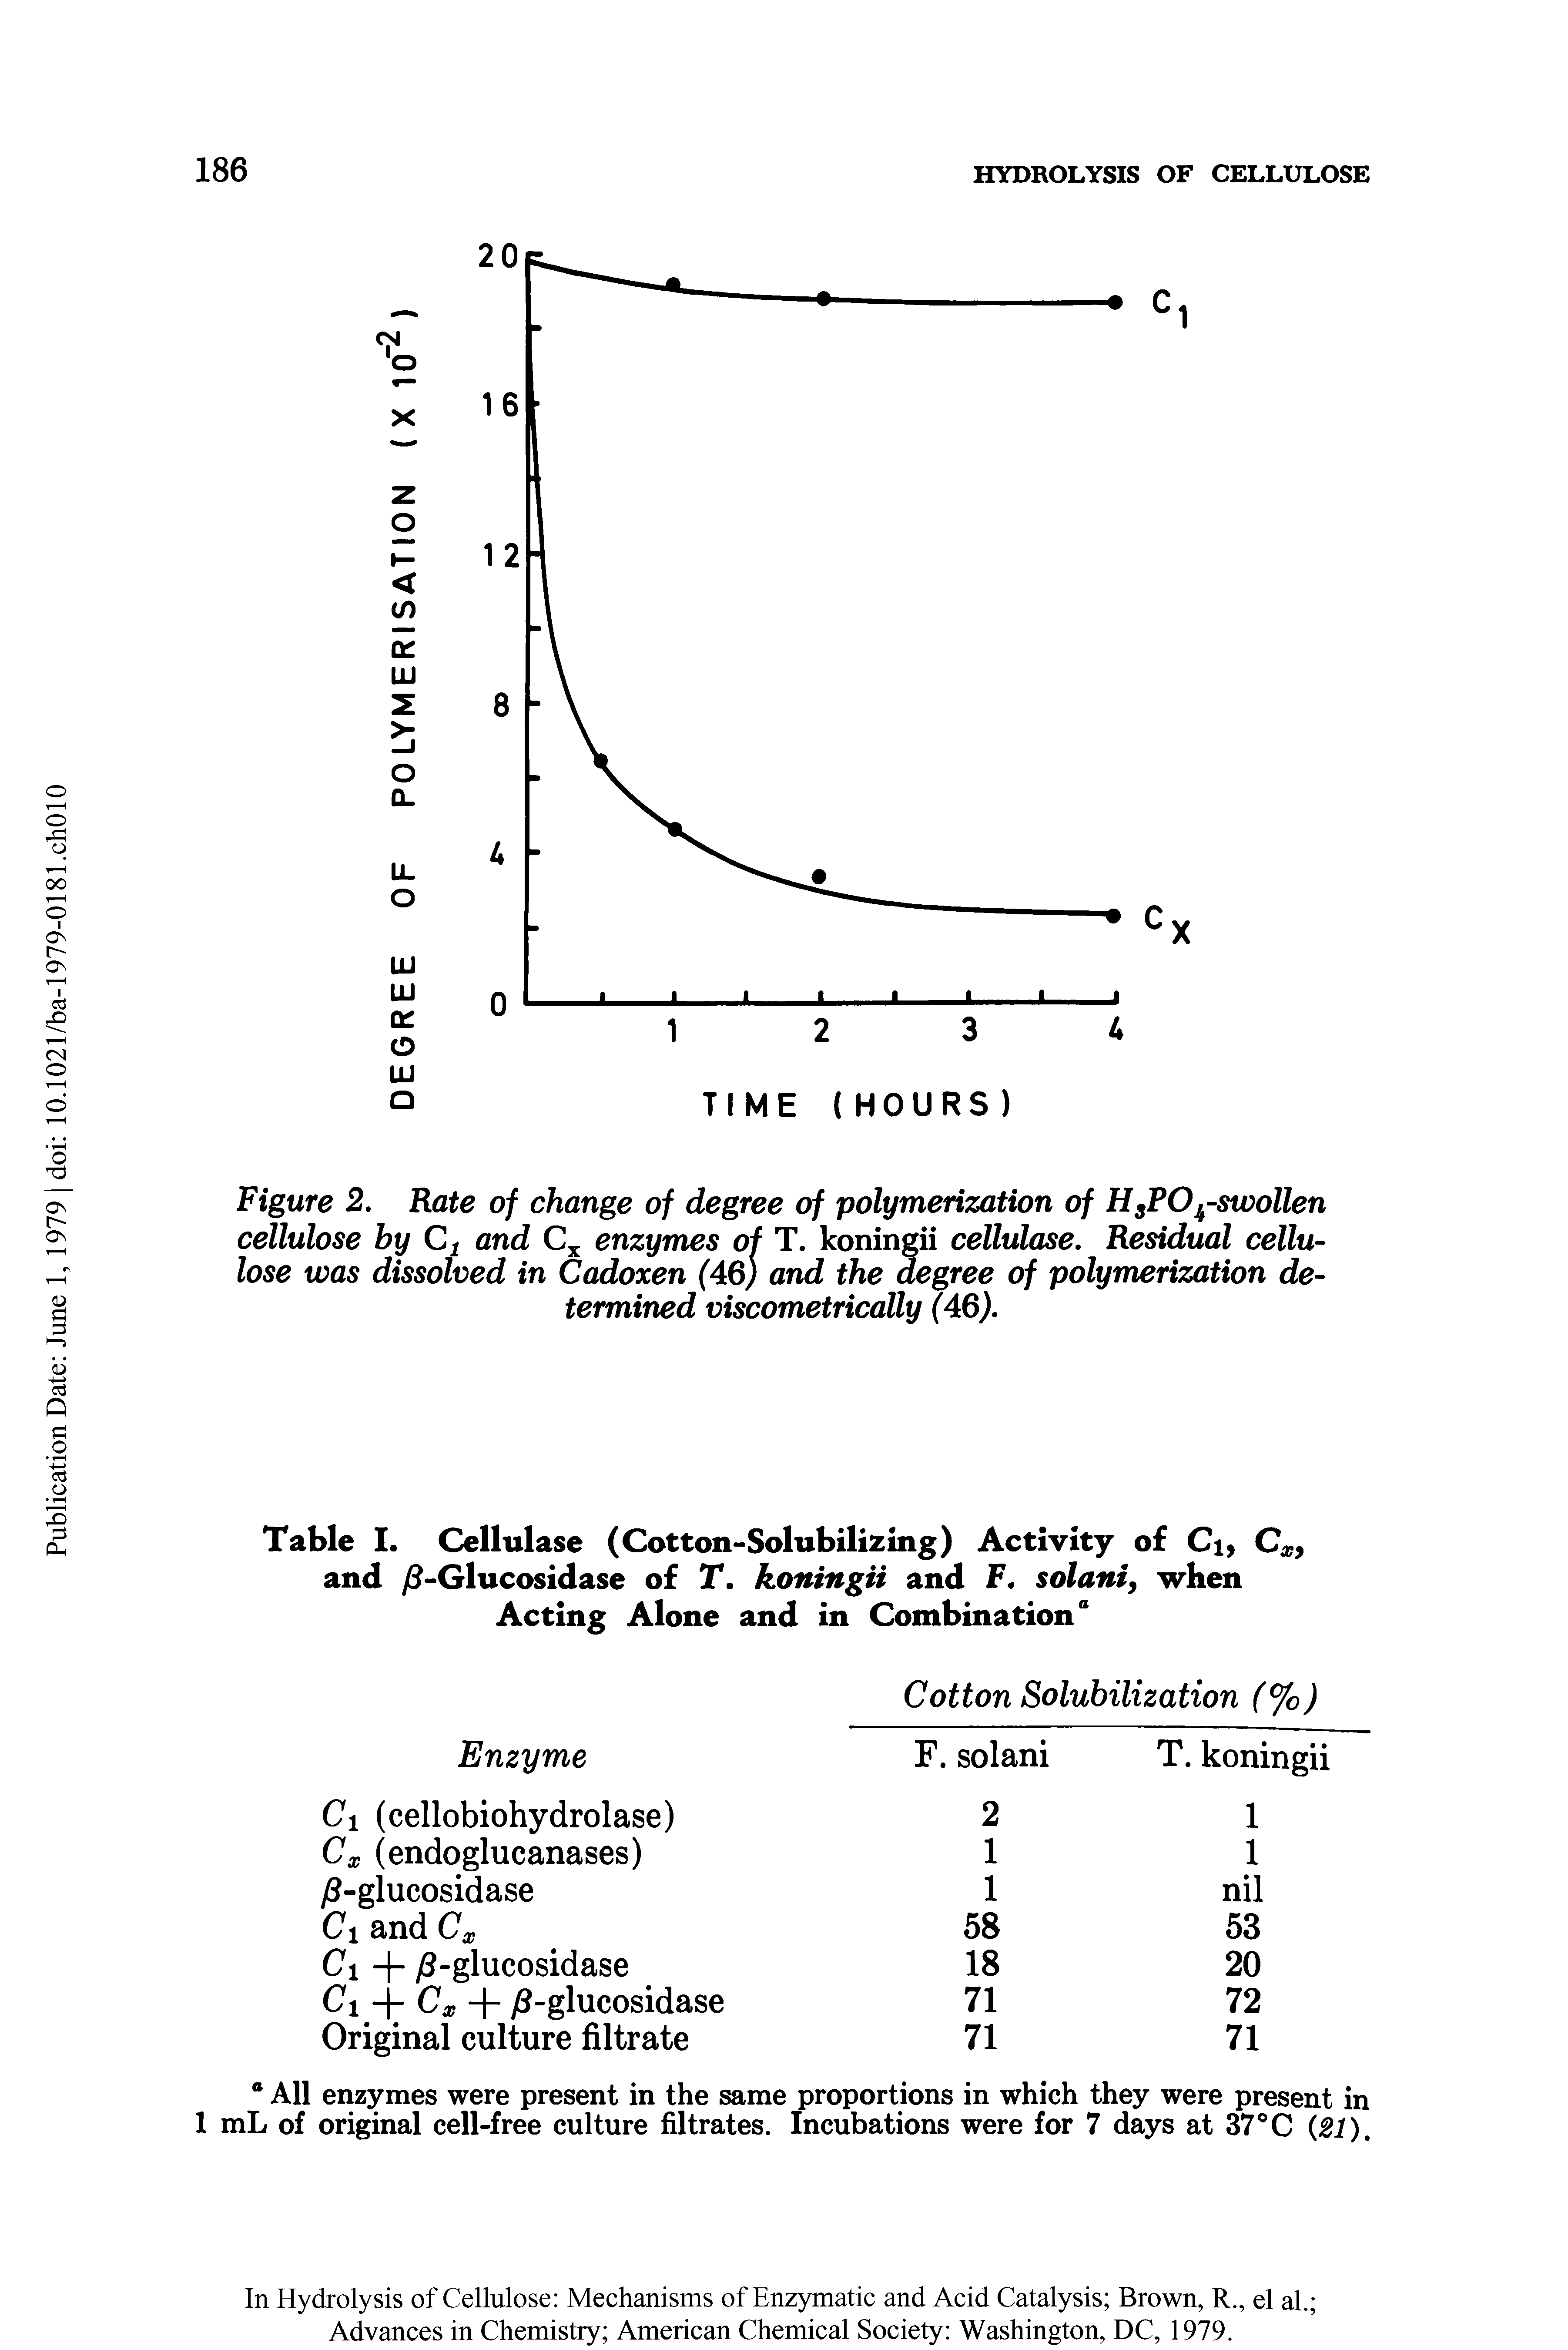 Figure 2. Rate of change of degree of polymerization of H5PO -swollen cellulose by Ct and Cx enzymes of T. koningii cellulose. Residual cellulose was dissolved in Cadoxen (46) and the degree of polymerization determined viscometrically (46).